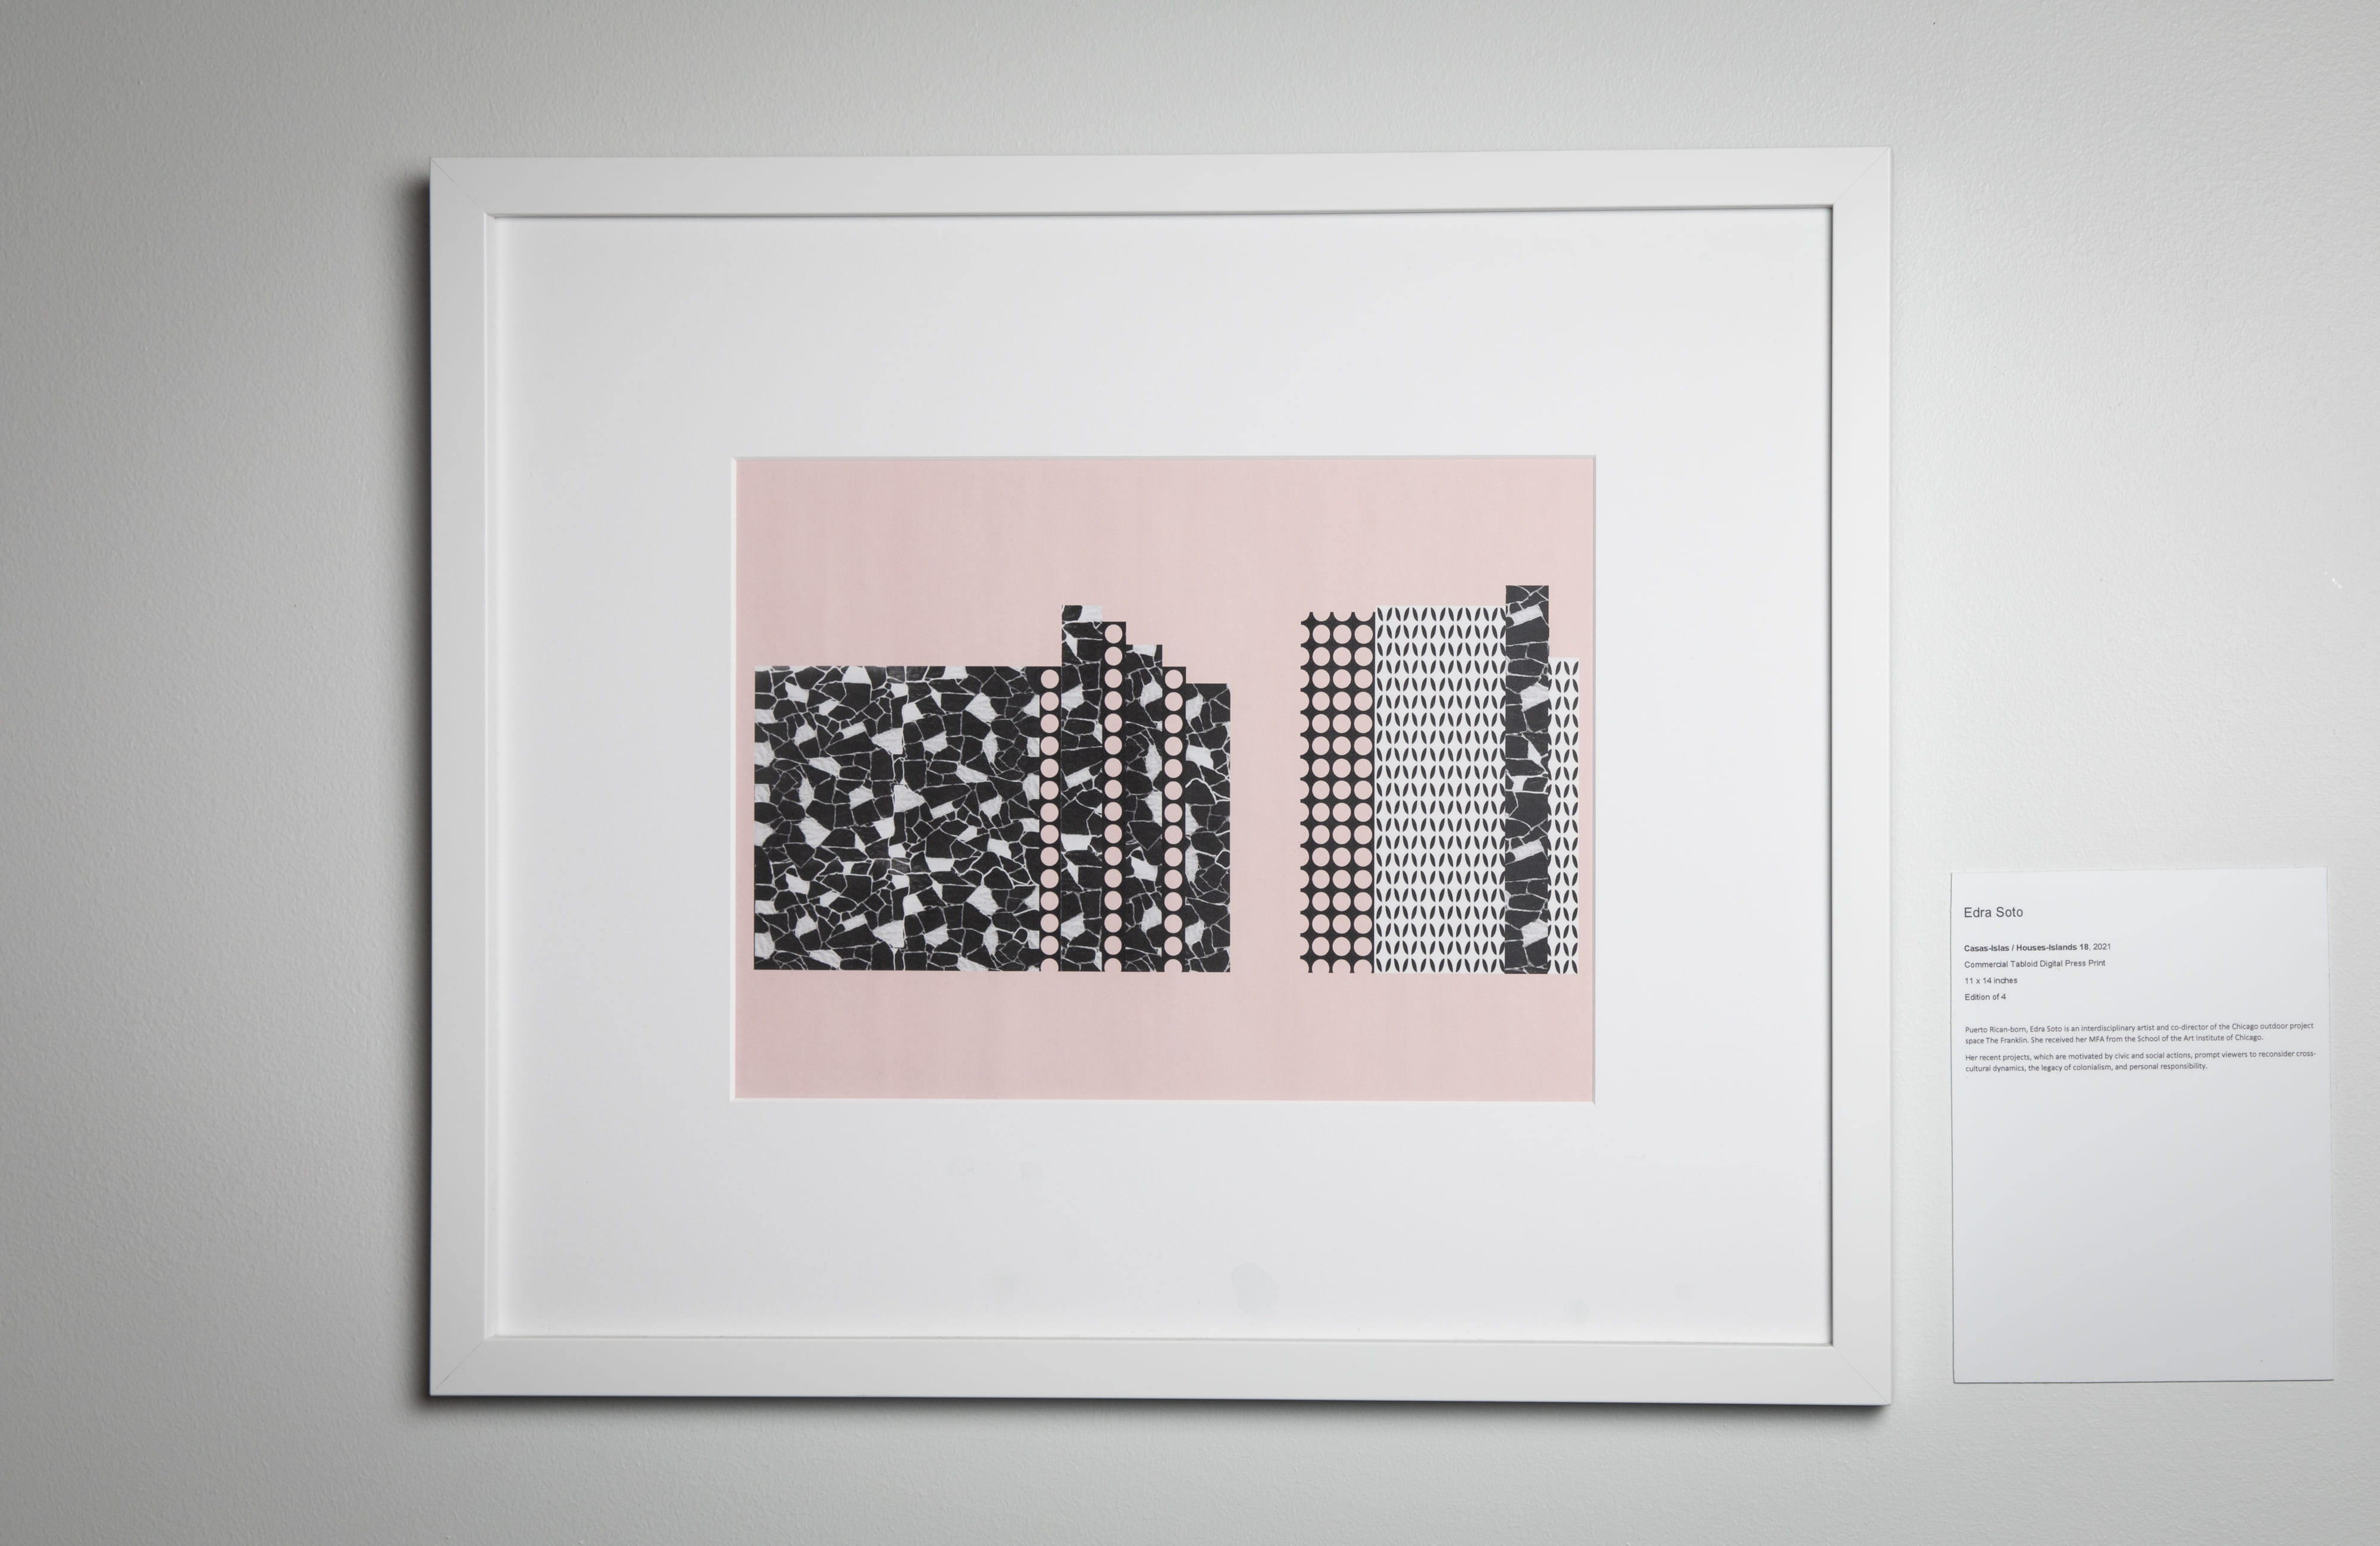 Black and white rectangular shapes are positioned vertically against a light pink background